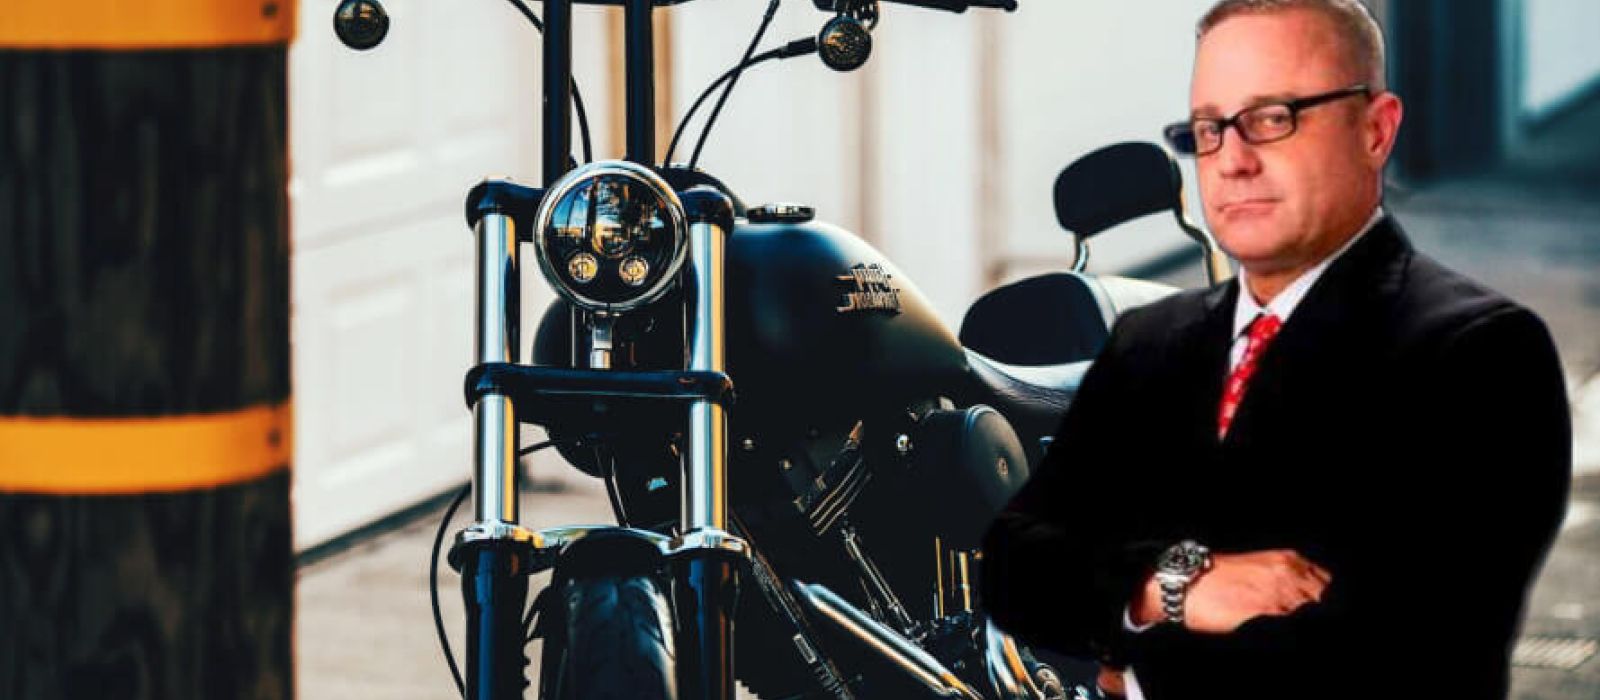 Lakewood motorcycle accident attorneys at Ehline Law are ready to fight